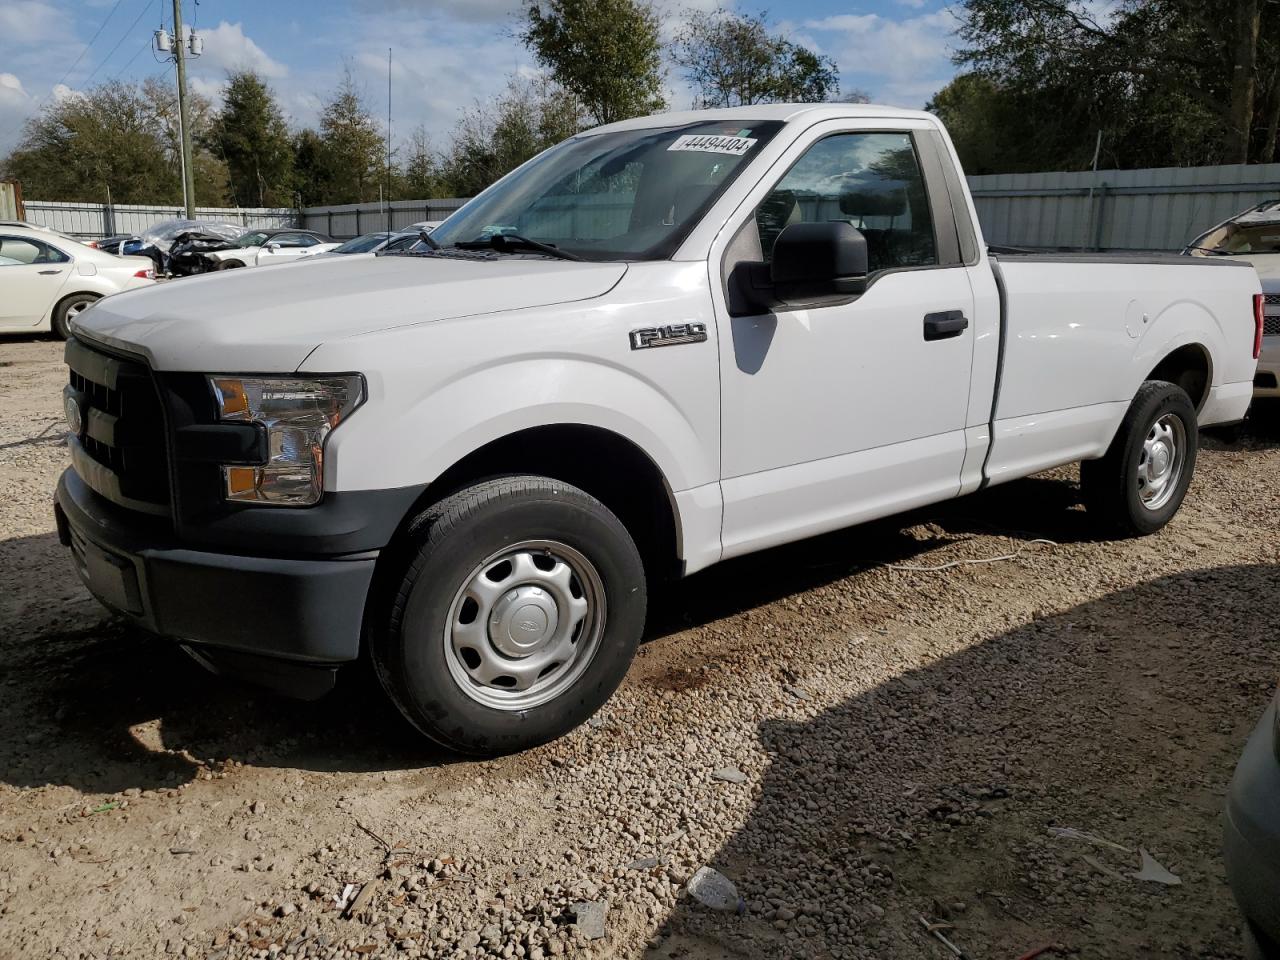 vin: 1FTMF1C81GKF75004 1FTMF1C81GKF75004 2016 ford f-150 3500 for Sale in 32343 6677, Fl - Tallahassee, Midway, USA